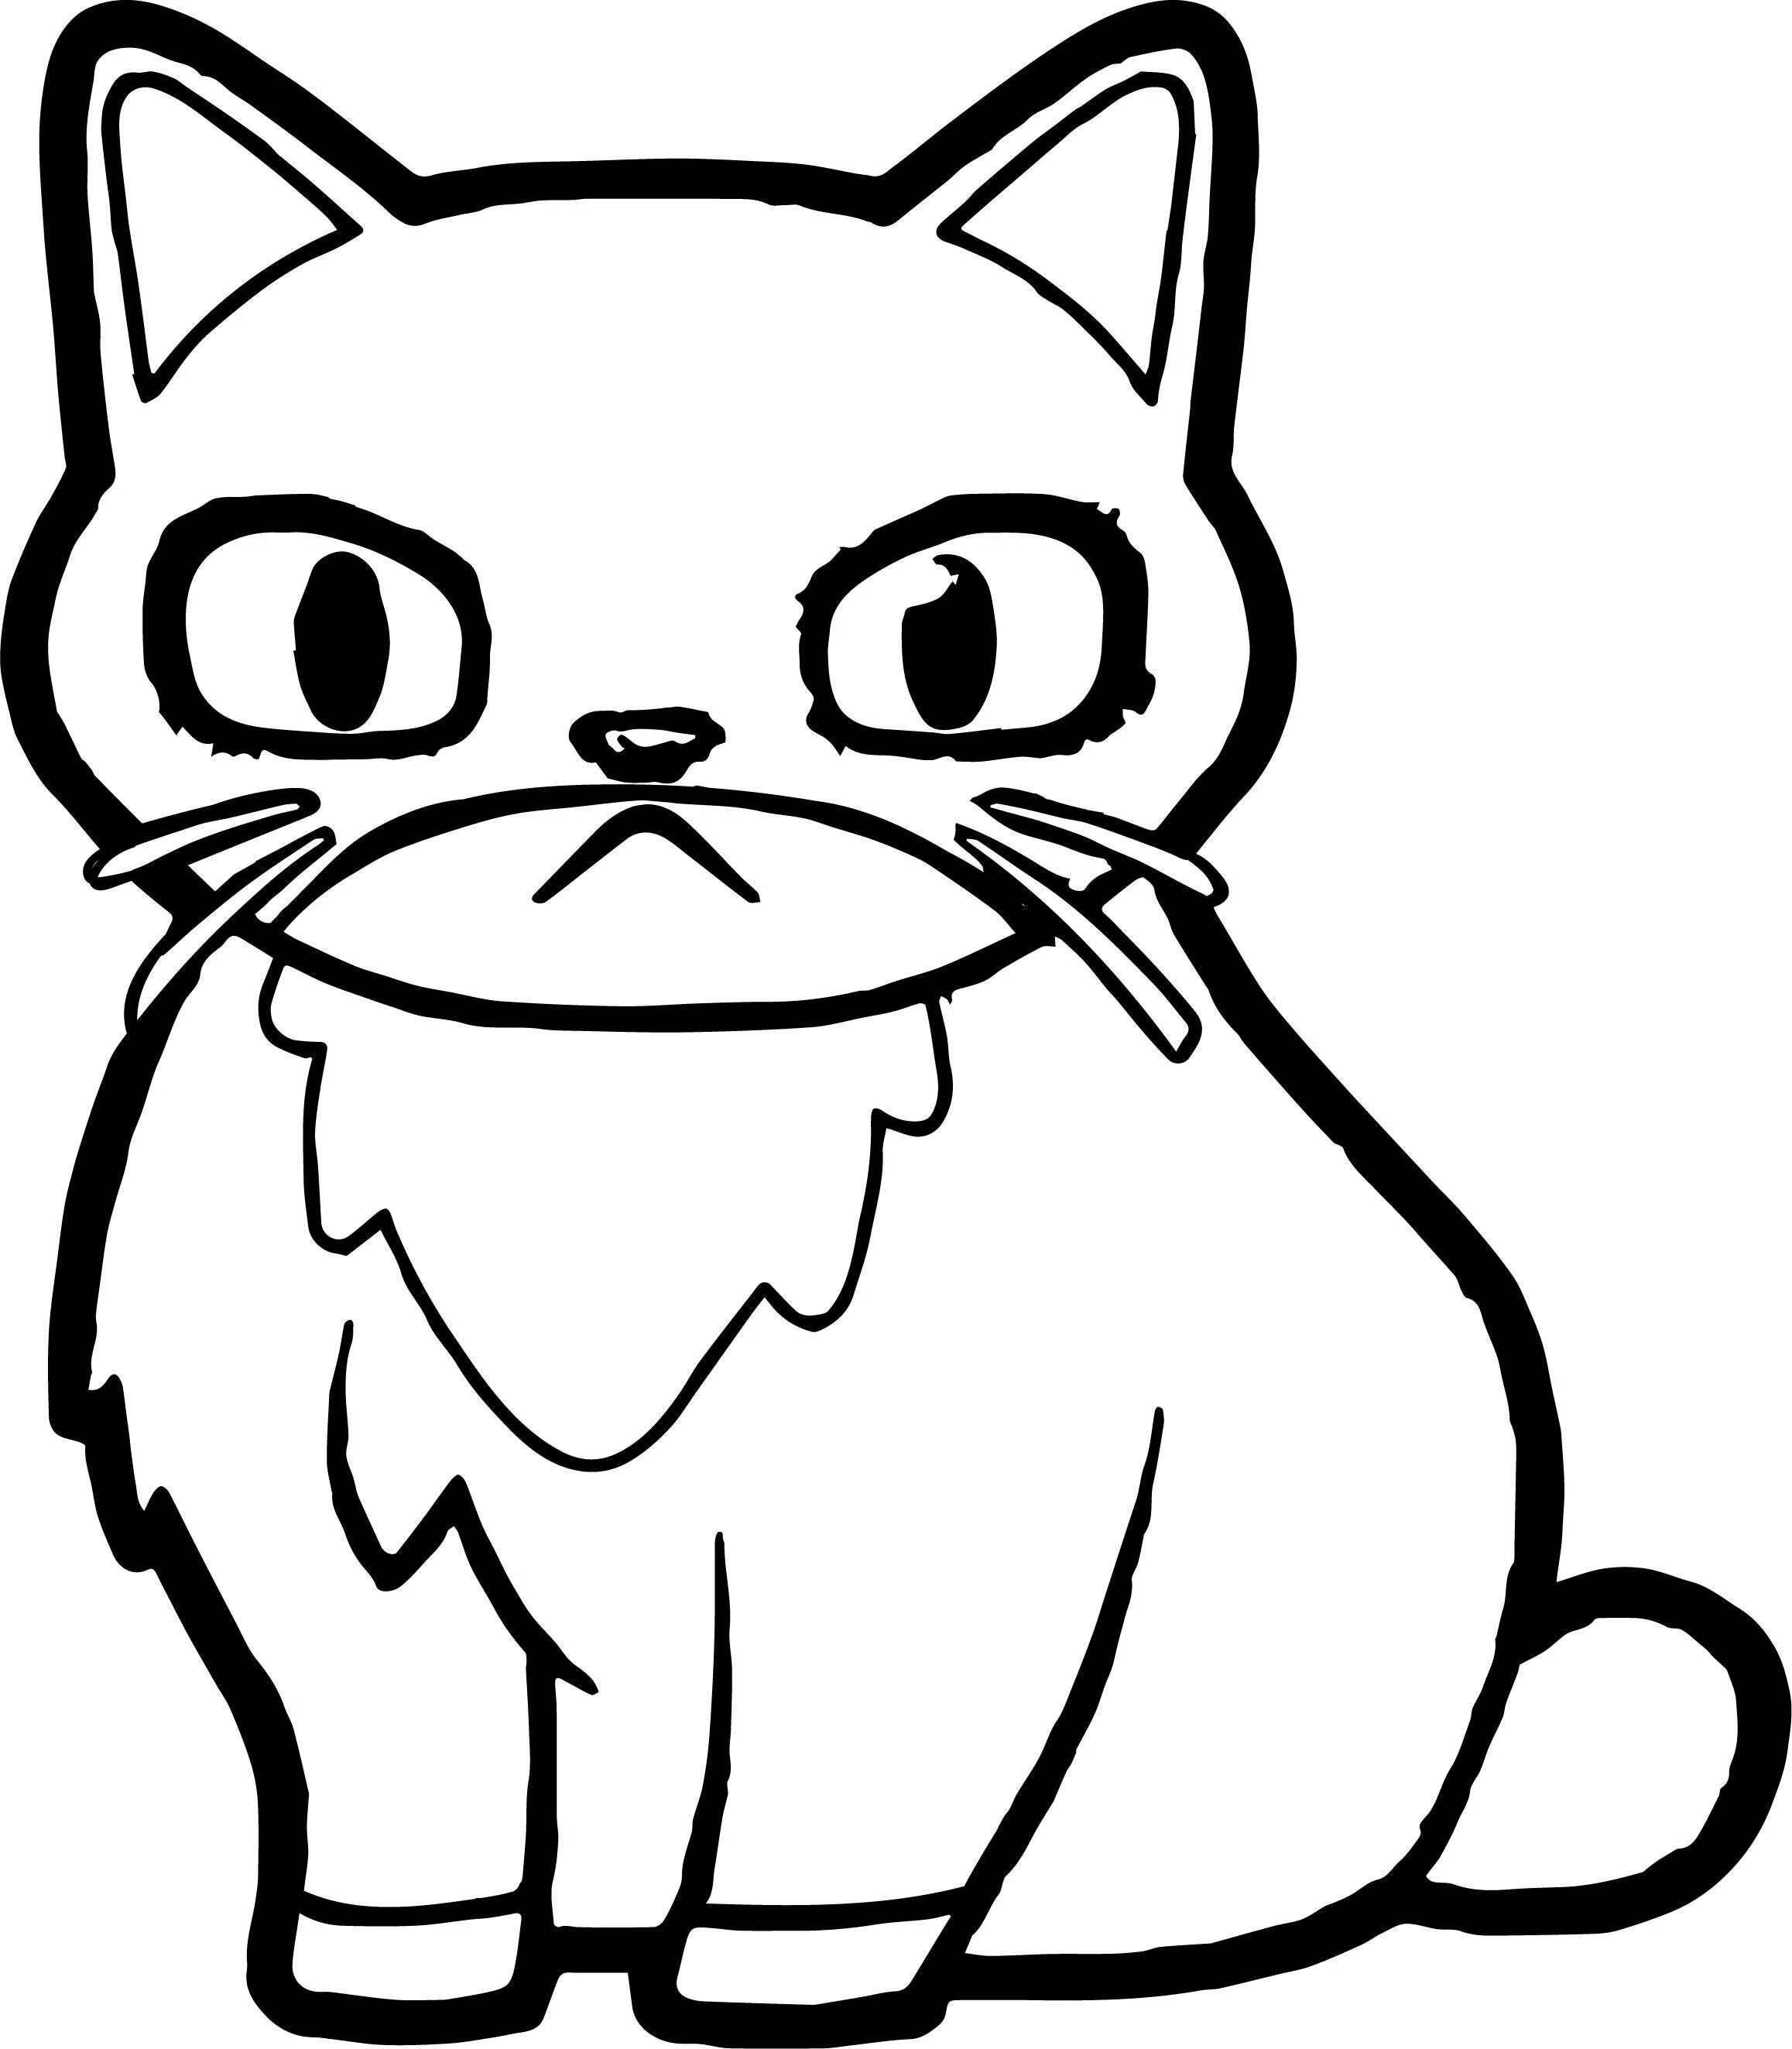 Relaxed cat coloring book